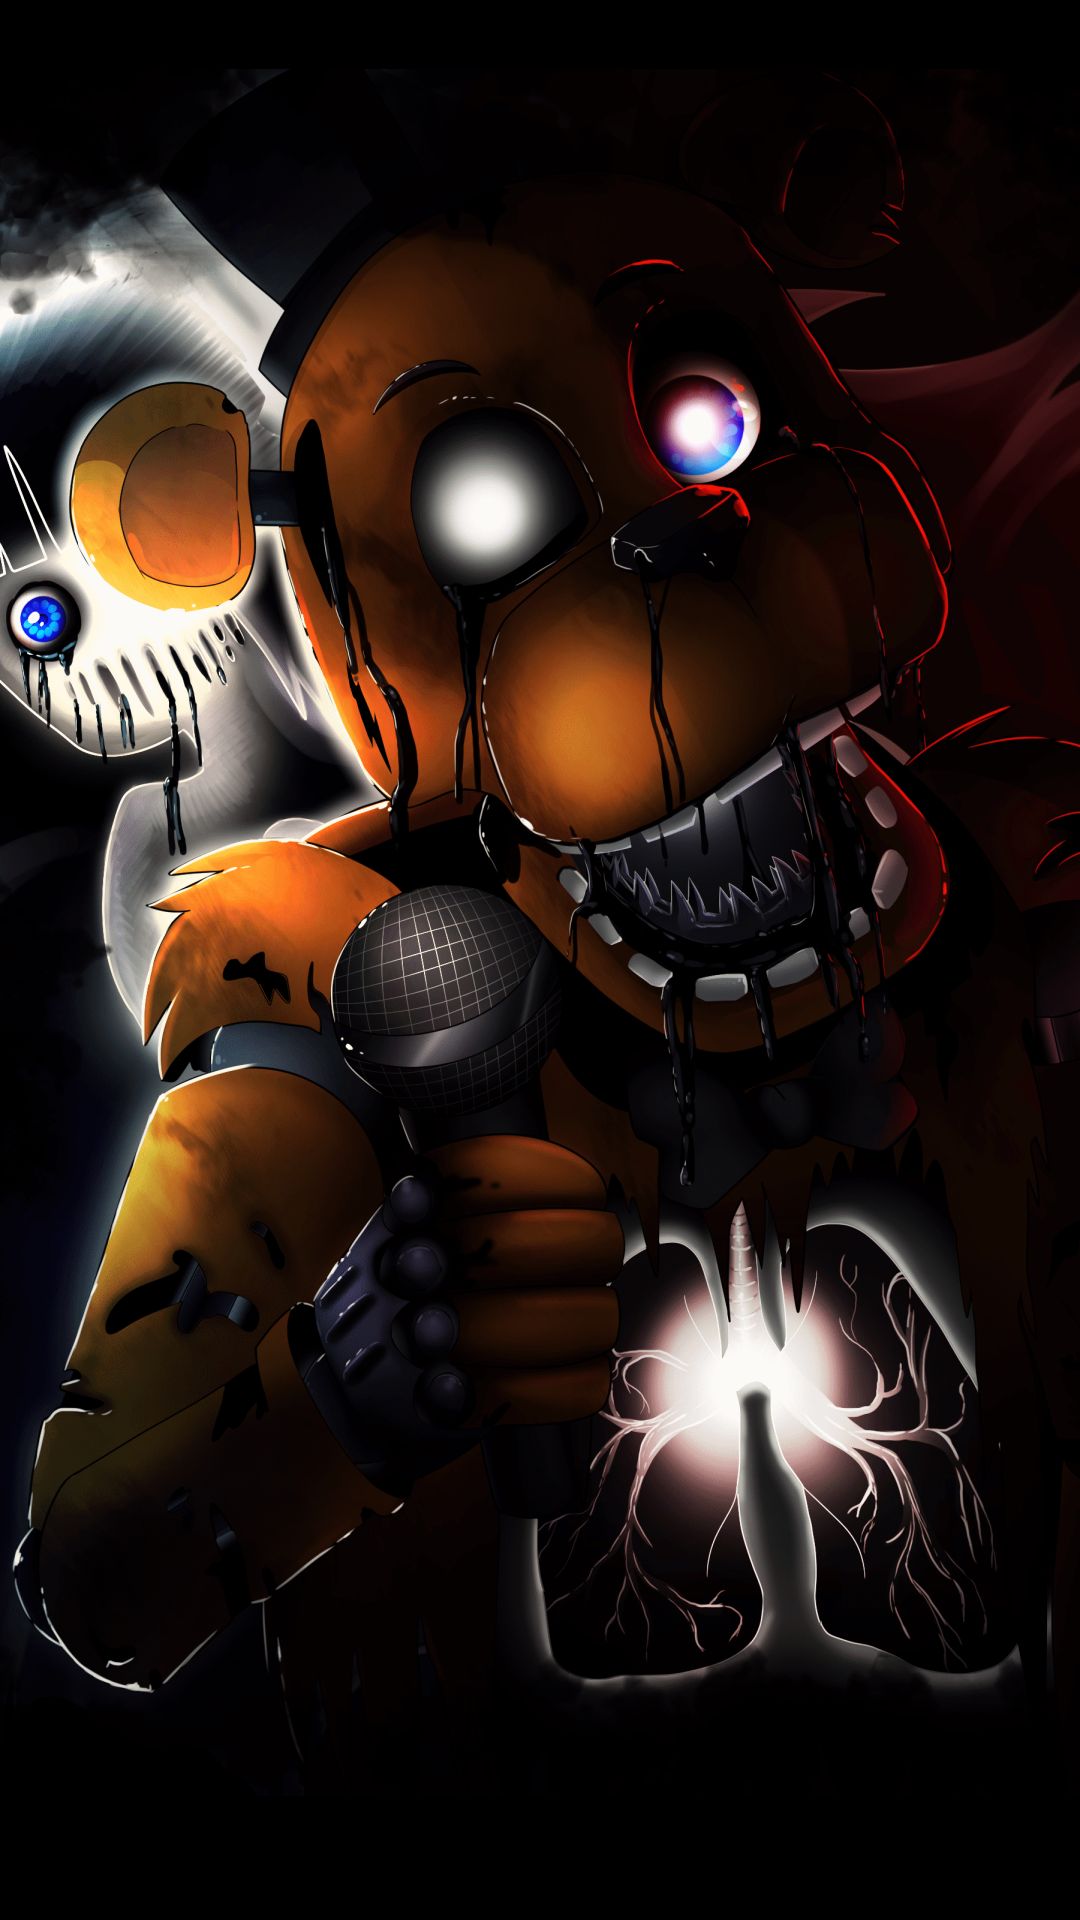 bonnie (five nights at freddy's), chica (five nights at freddy's), foxy (five nights at freddy's), video game, five nights at freddy's 4, freddy (five nights at freddy's), five nights at freddy's